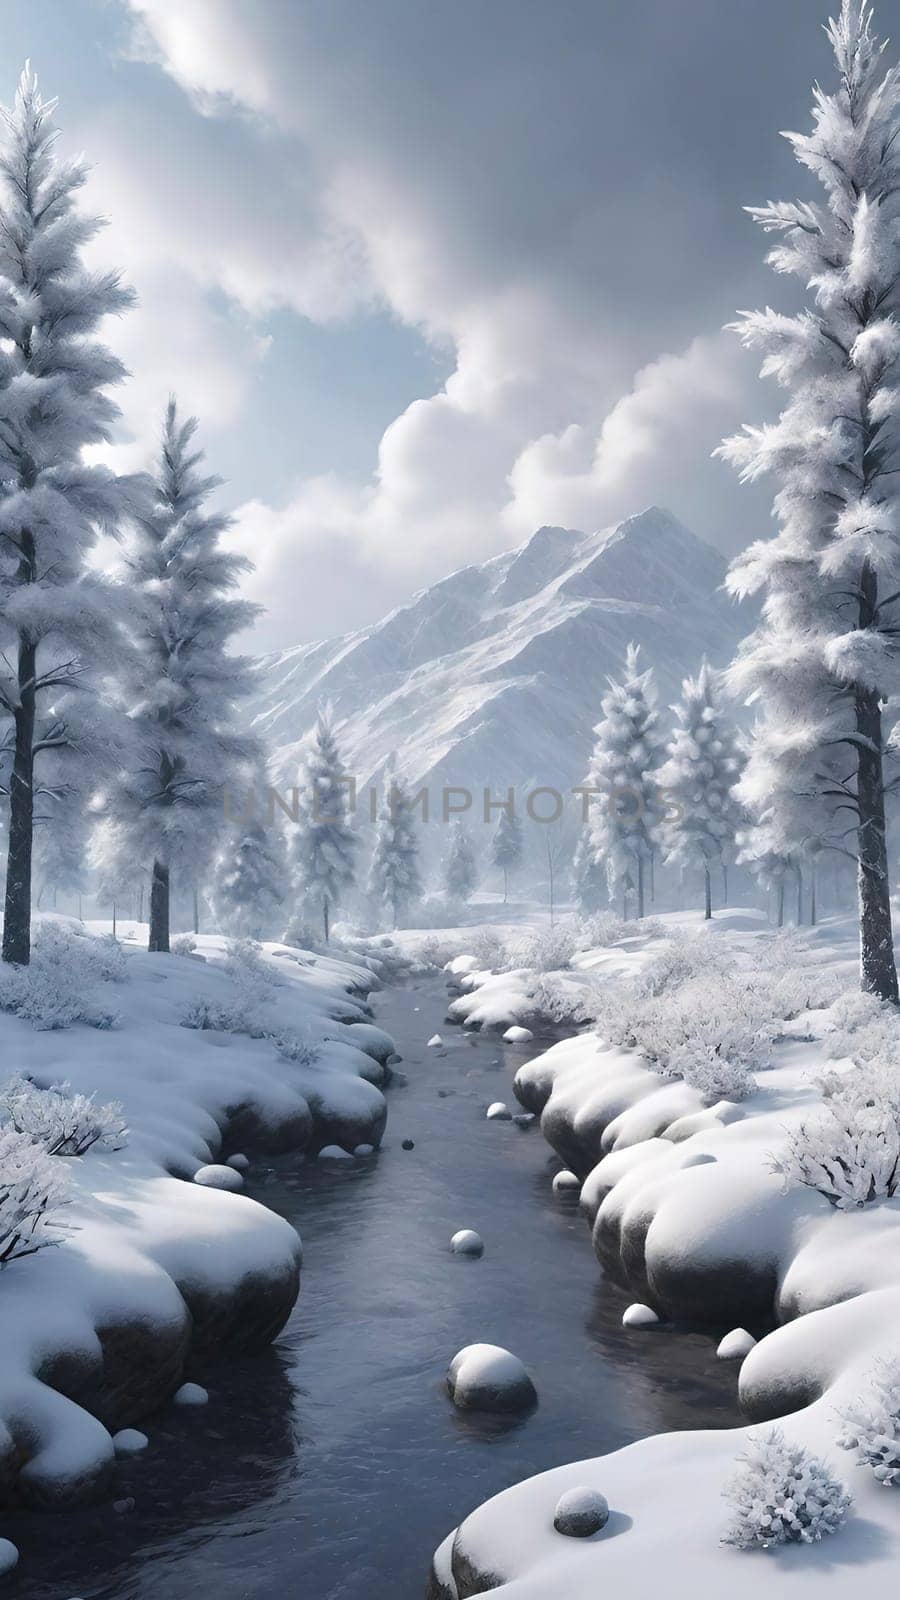 Snowy nature landscape with heavy snowfall effect.